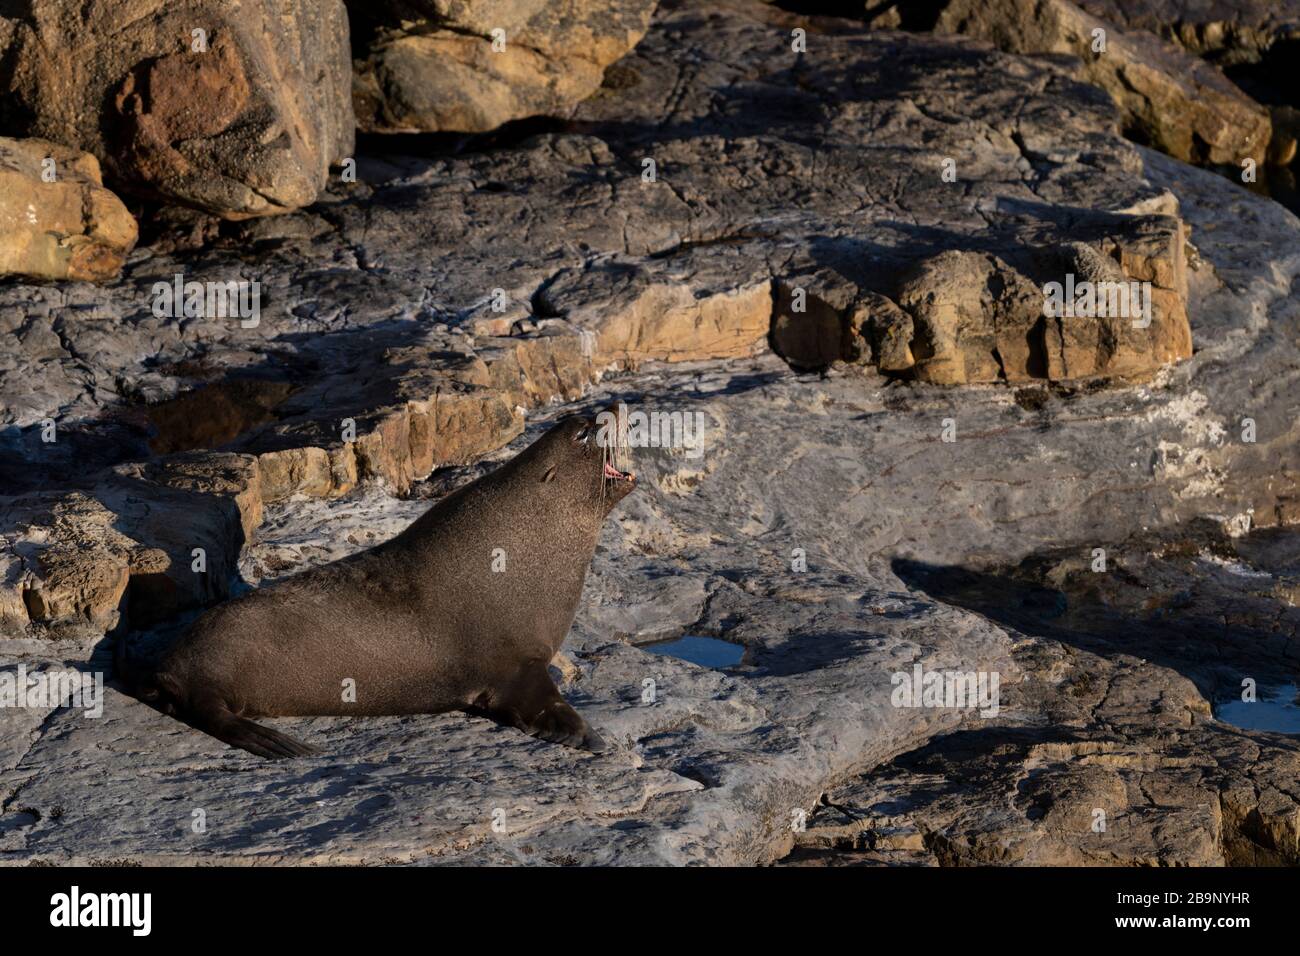 New Zealand fur seal yawning during a sunny sunrise at Shag Point, New Zealand. There is a full colony of 'kekeno', the name given by the Maori, on th Stock Photo